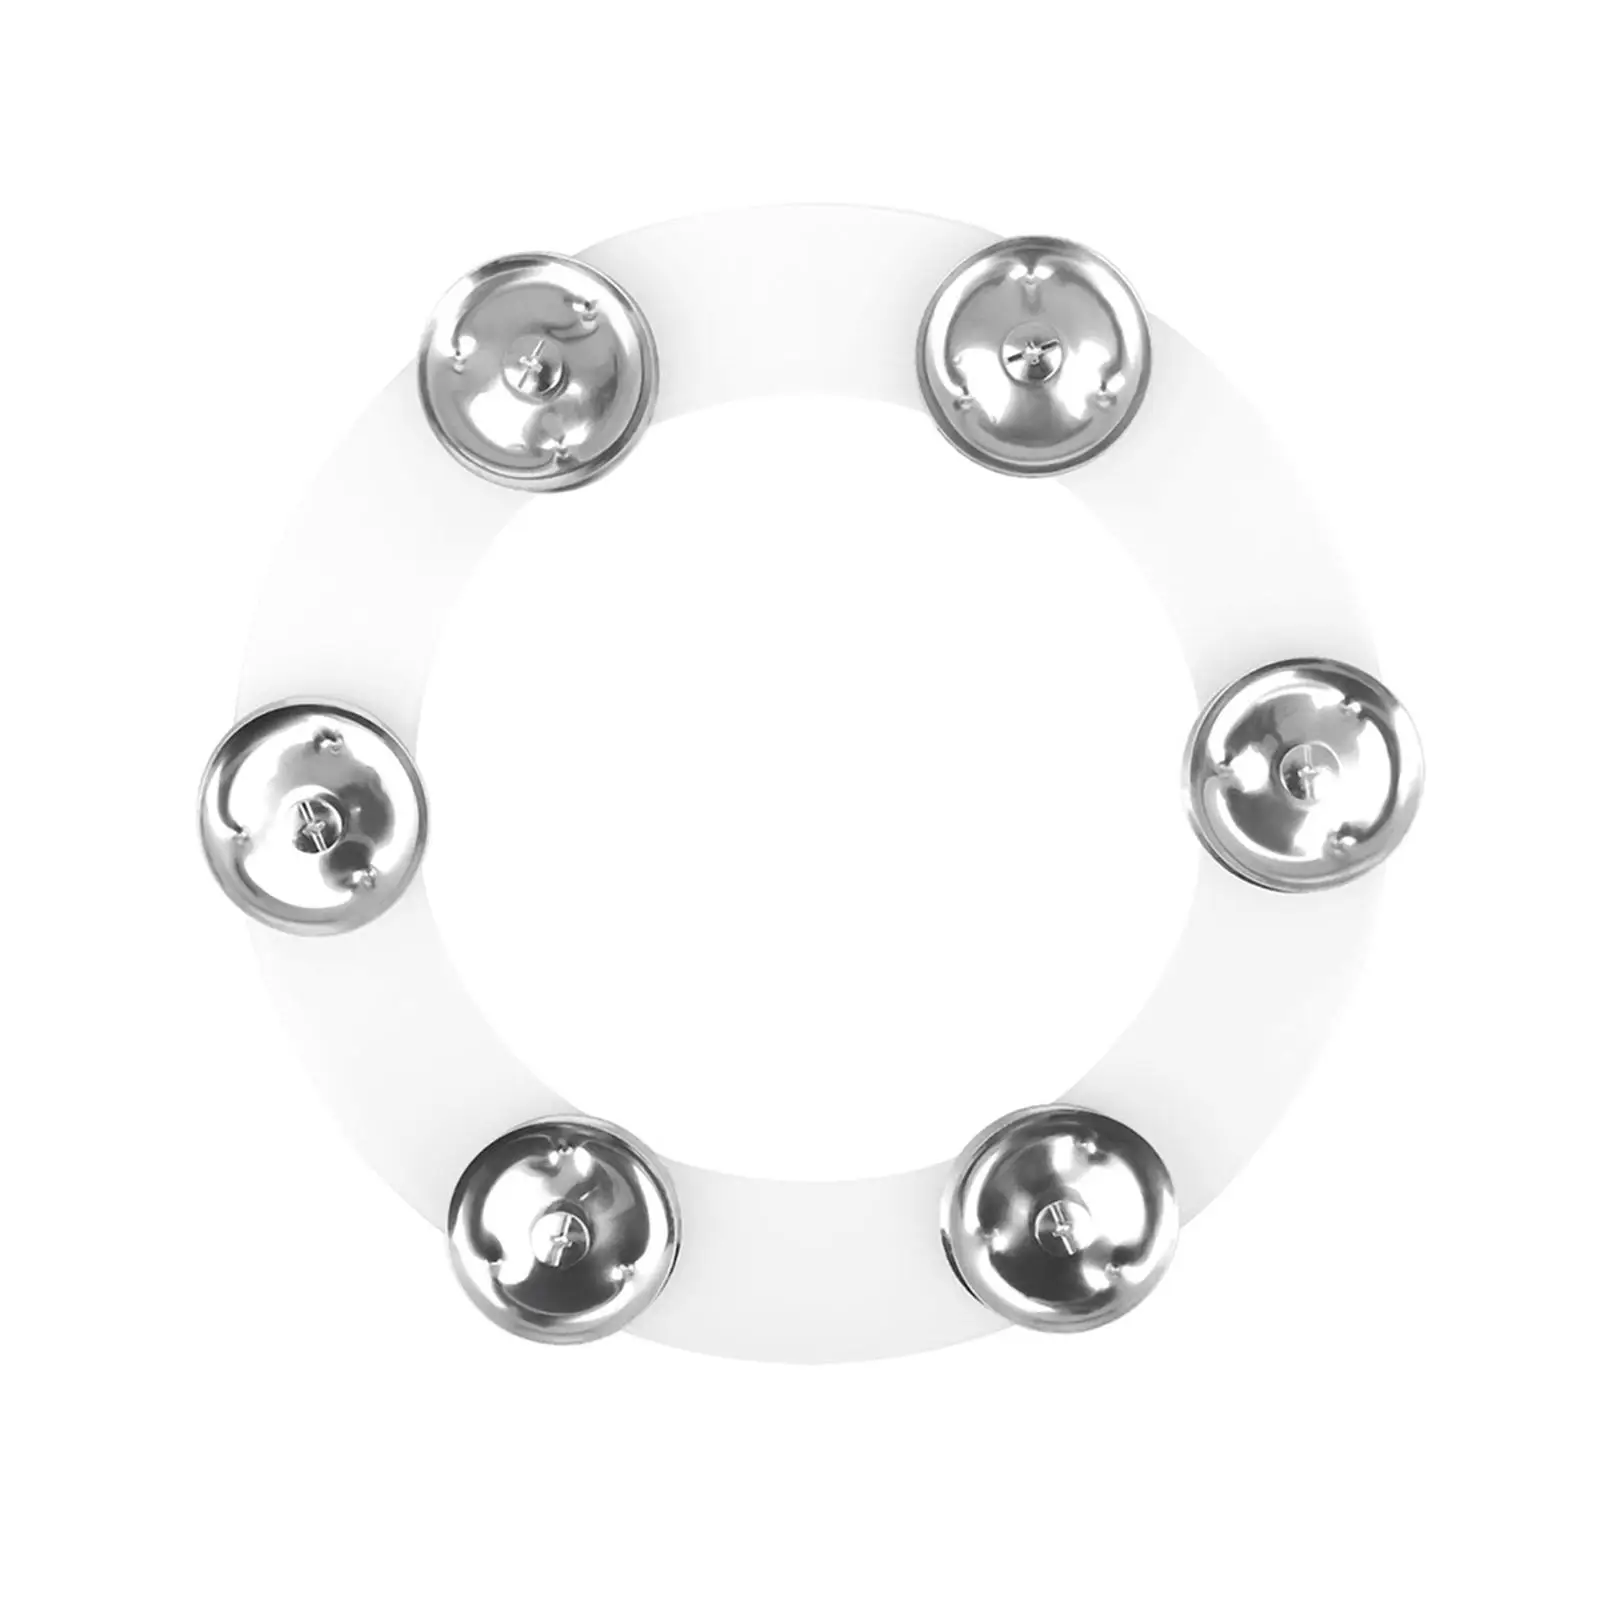 Cymbals Ching Jingle Effect with Single Row Accessory Cymbal Tambourine